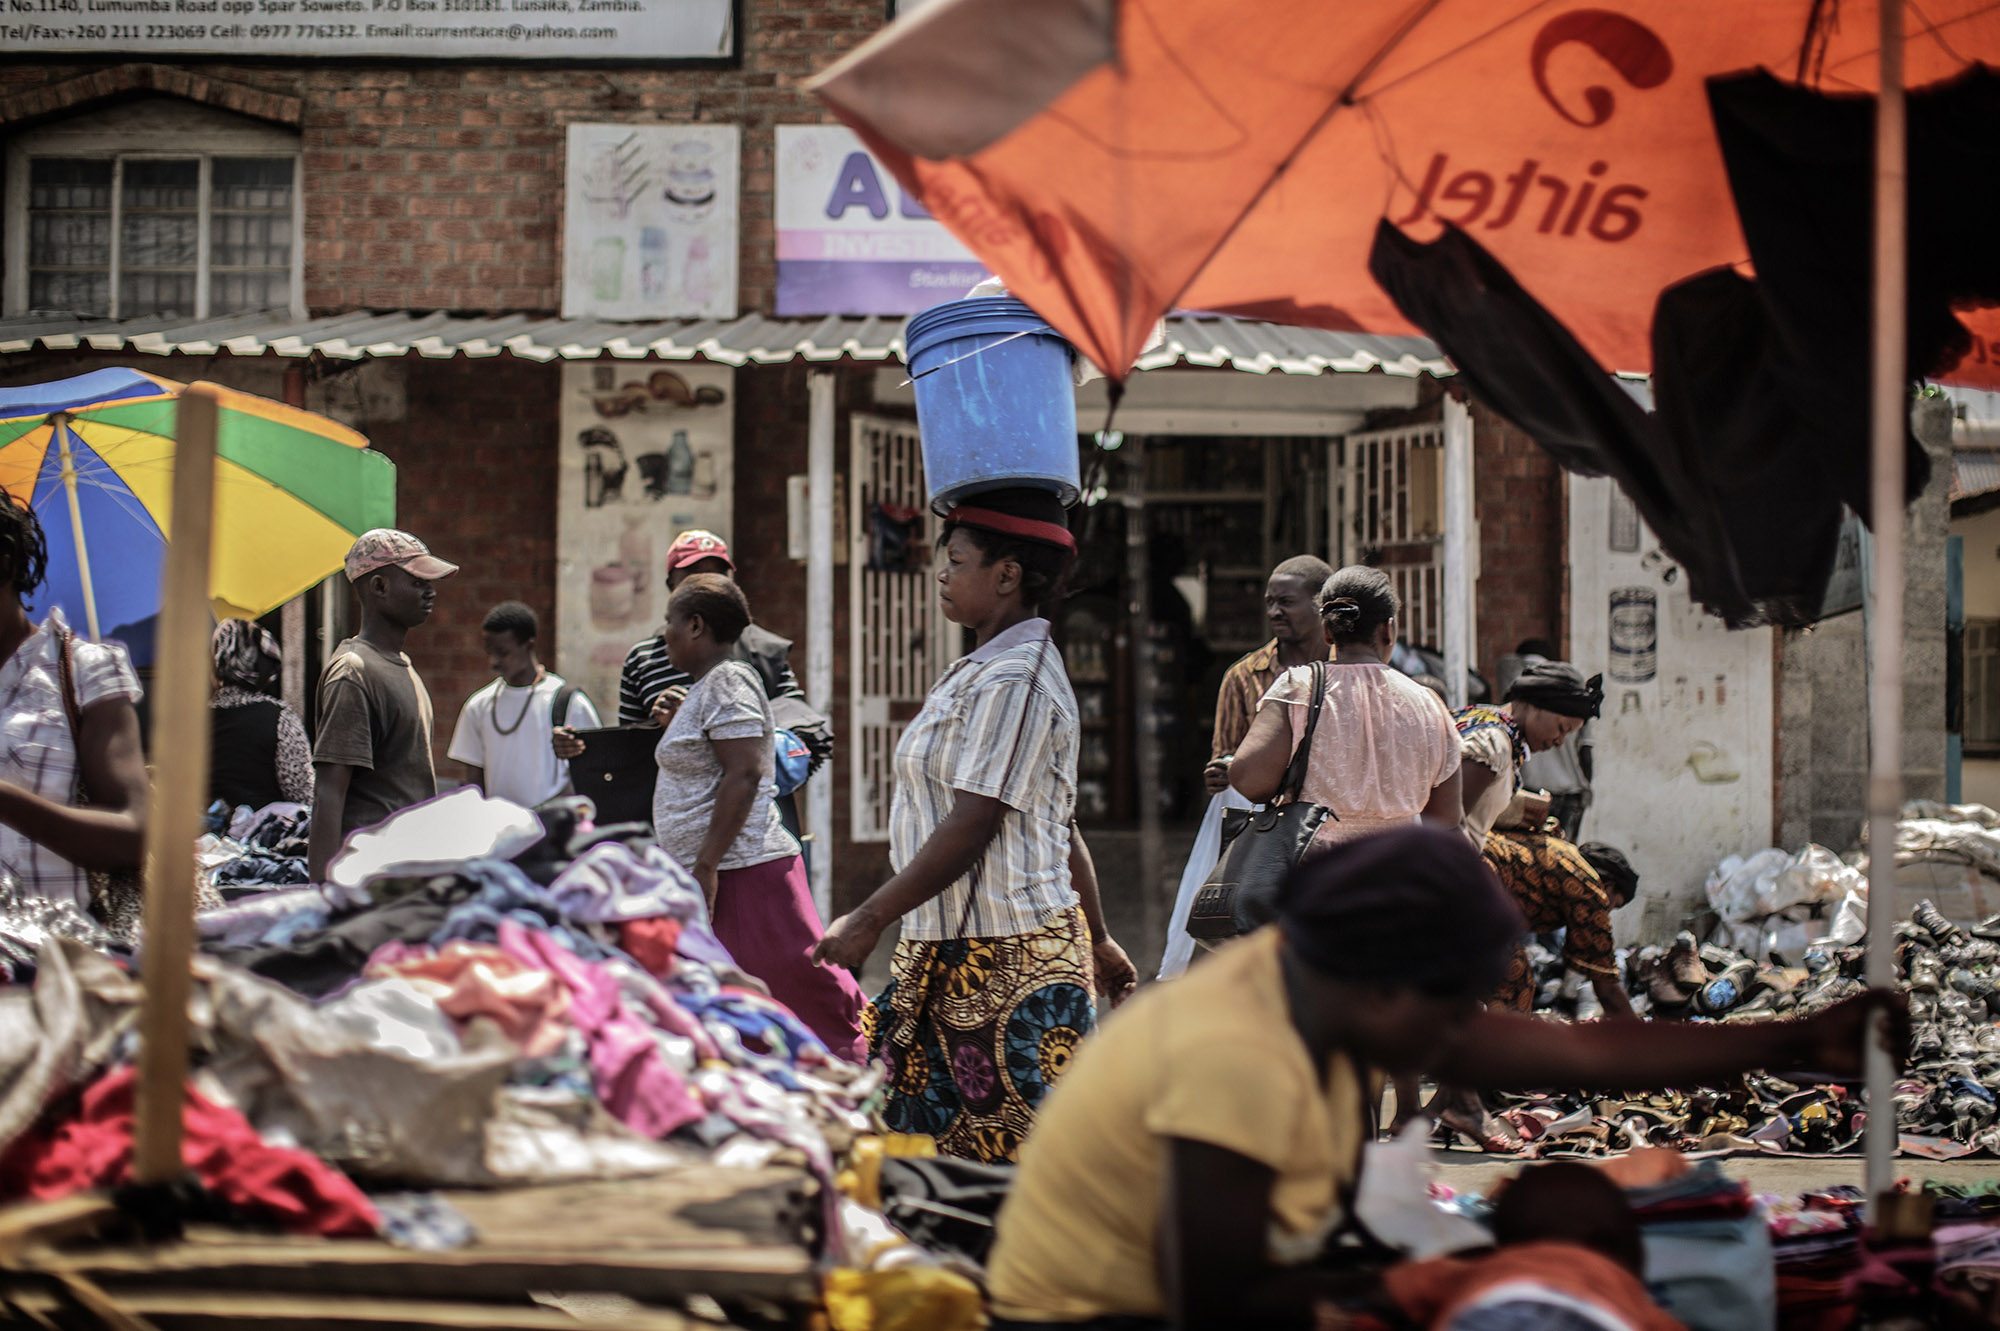 People shop at an open air market&nbsp;in Lusaka.